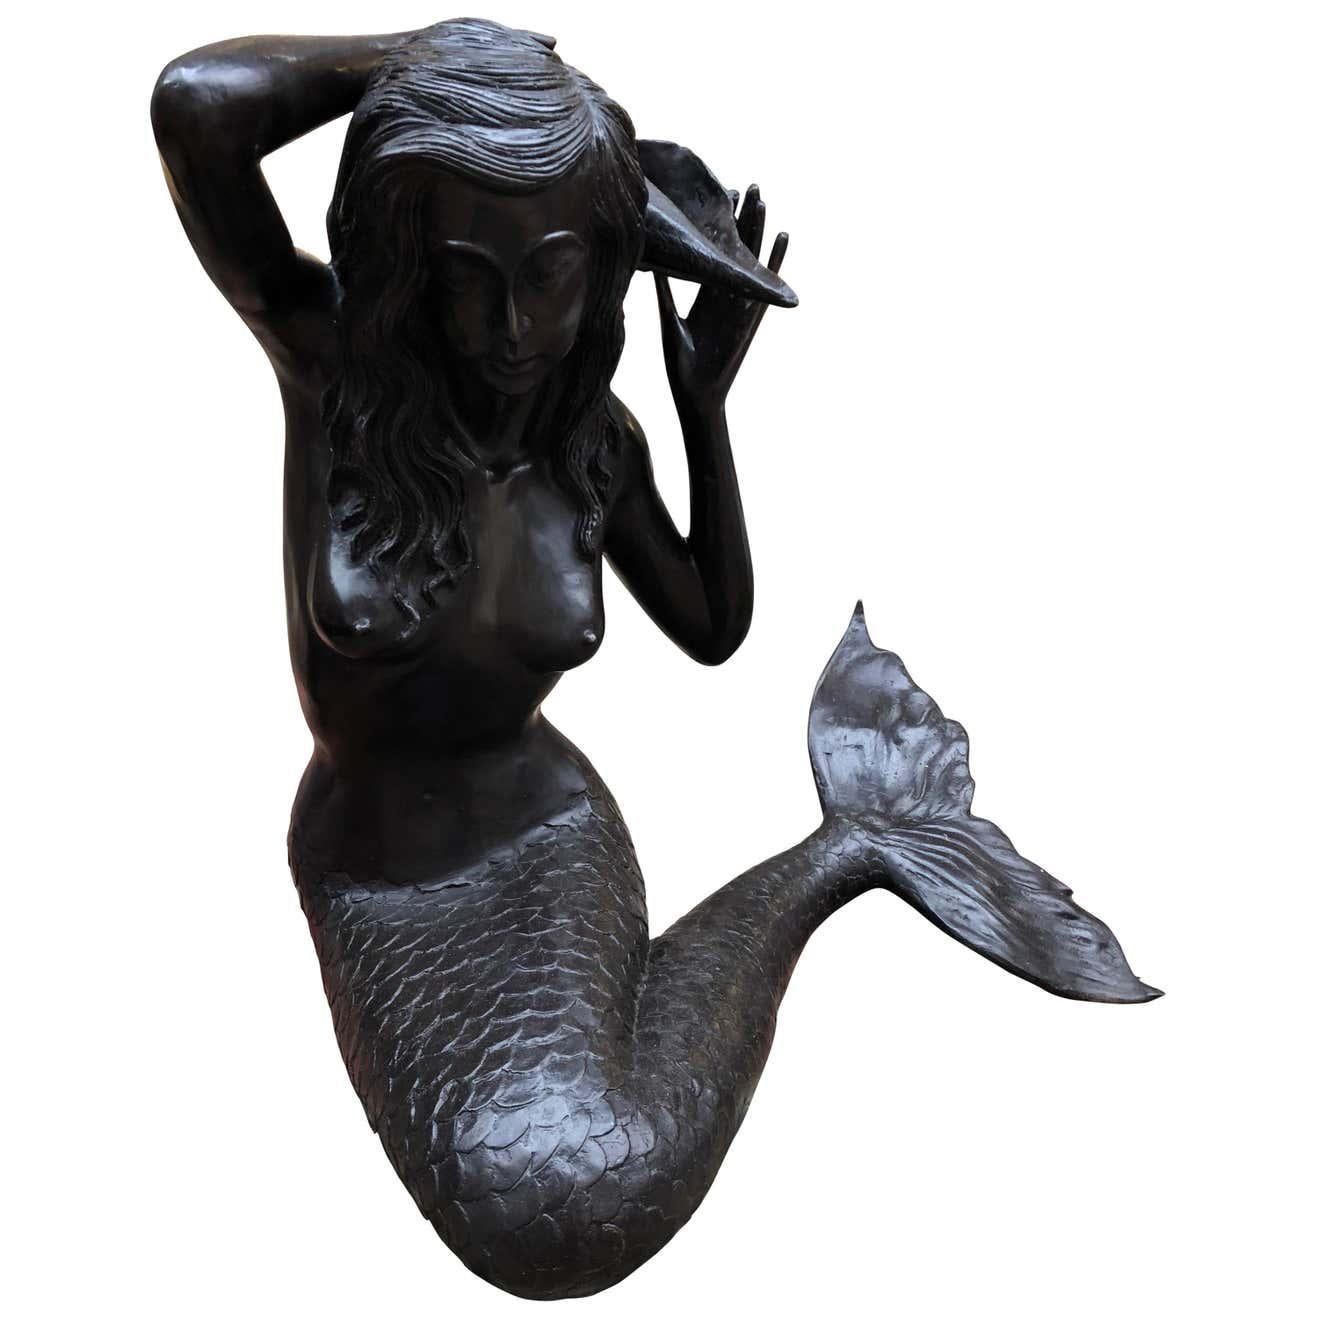 A fantastic bronze mermaid fountain garden statue siren female figurine, 20th century. Cast from bronze with lovely patina. Of course being bronze this can live outside with no fear of rusting. Piece is a fountain, the inlet tube is under her fin